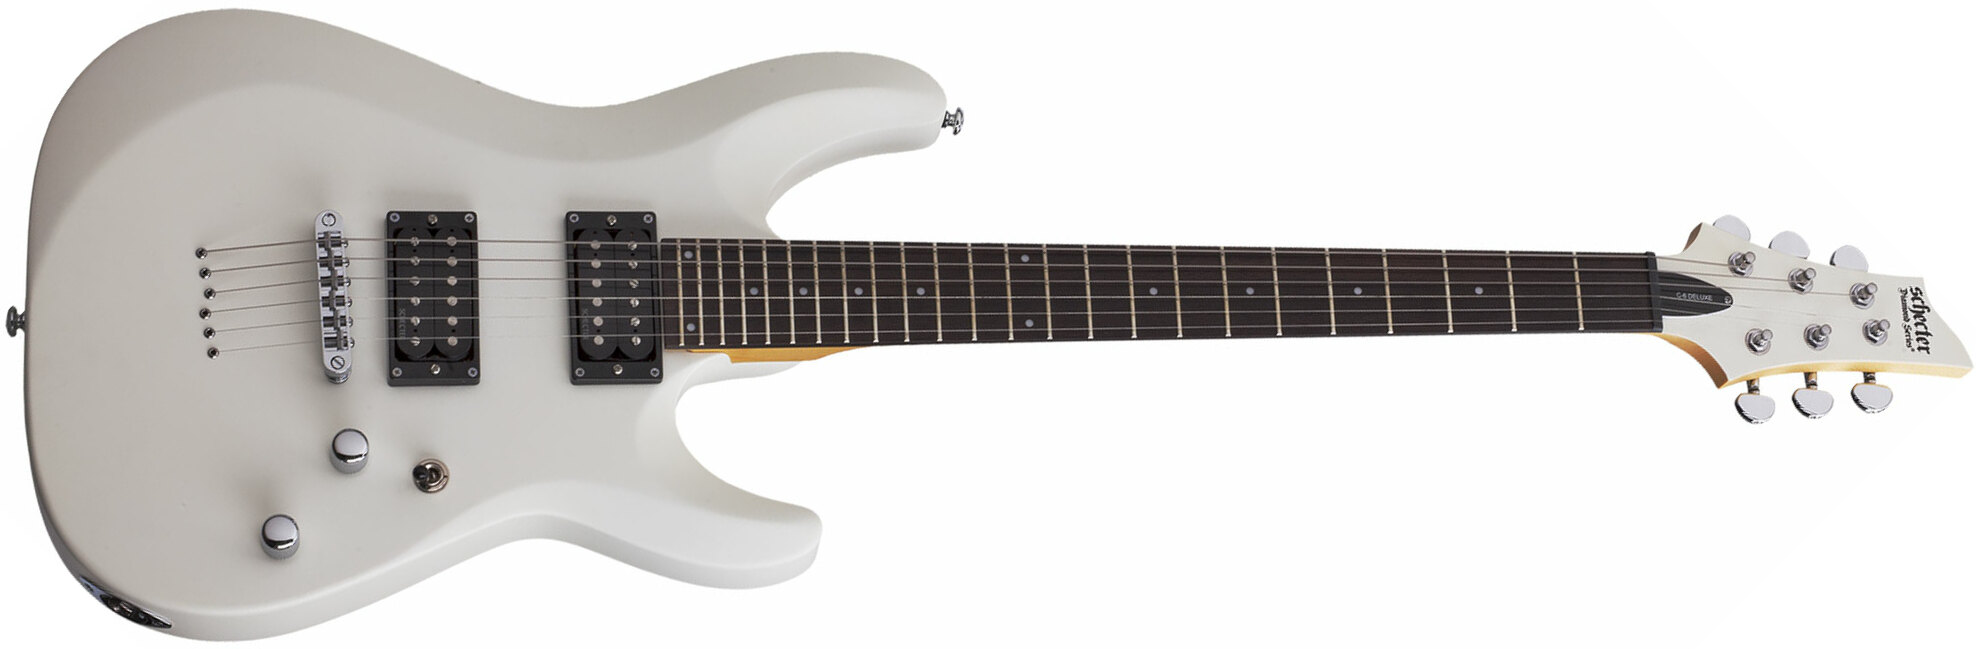 Schecter C-6 Deluxe 2h Ht Rw - Satin White - Double cut electric guitar - Main picture